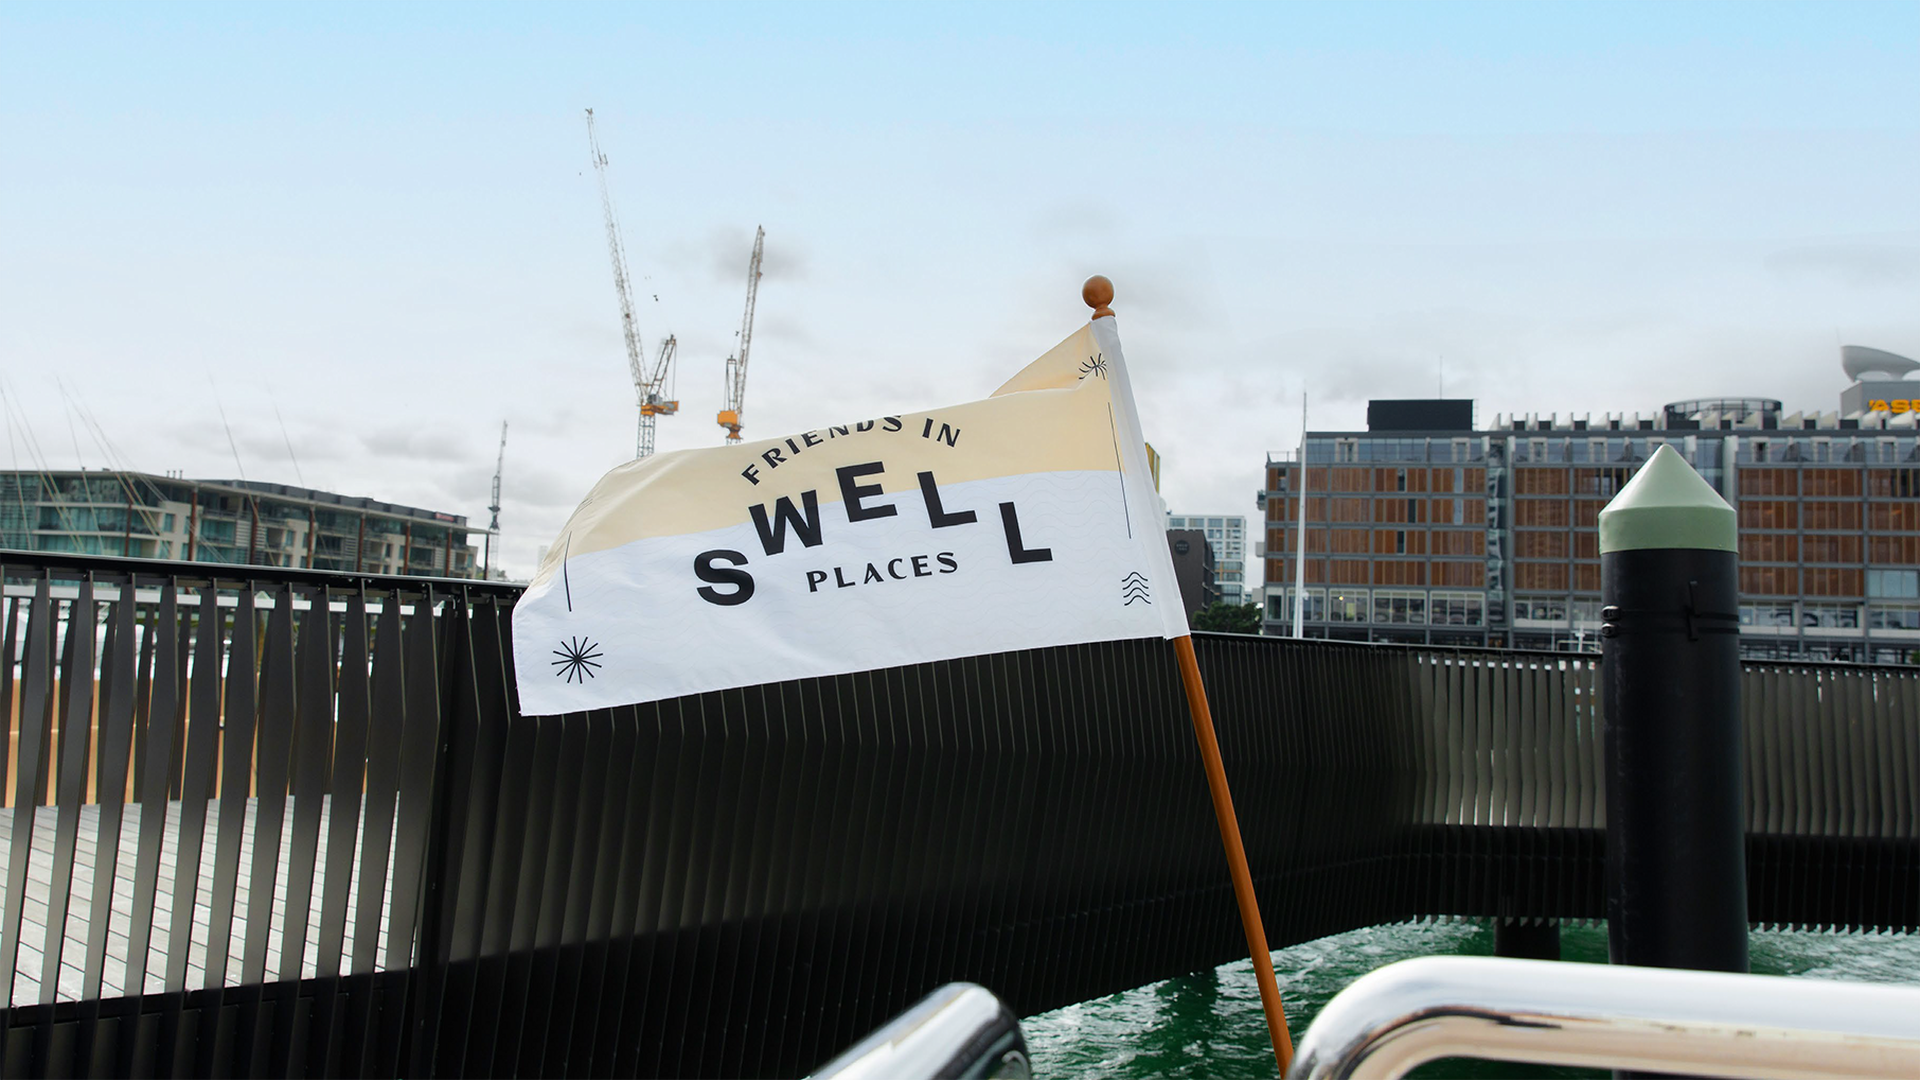 Concept of Sail GP Friends in Swell Places branded flag on a dock